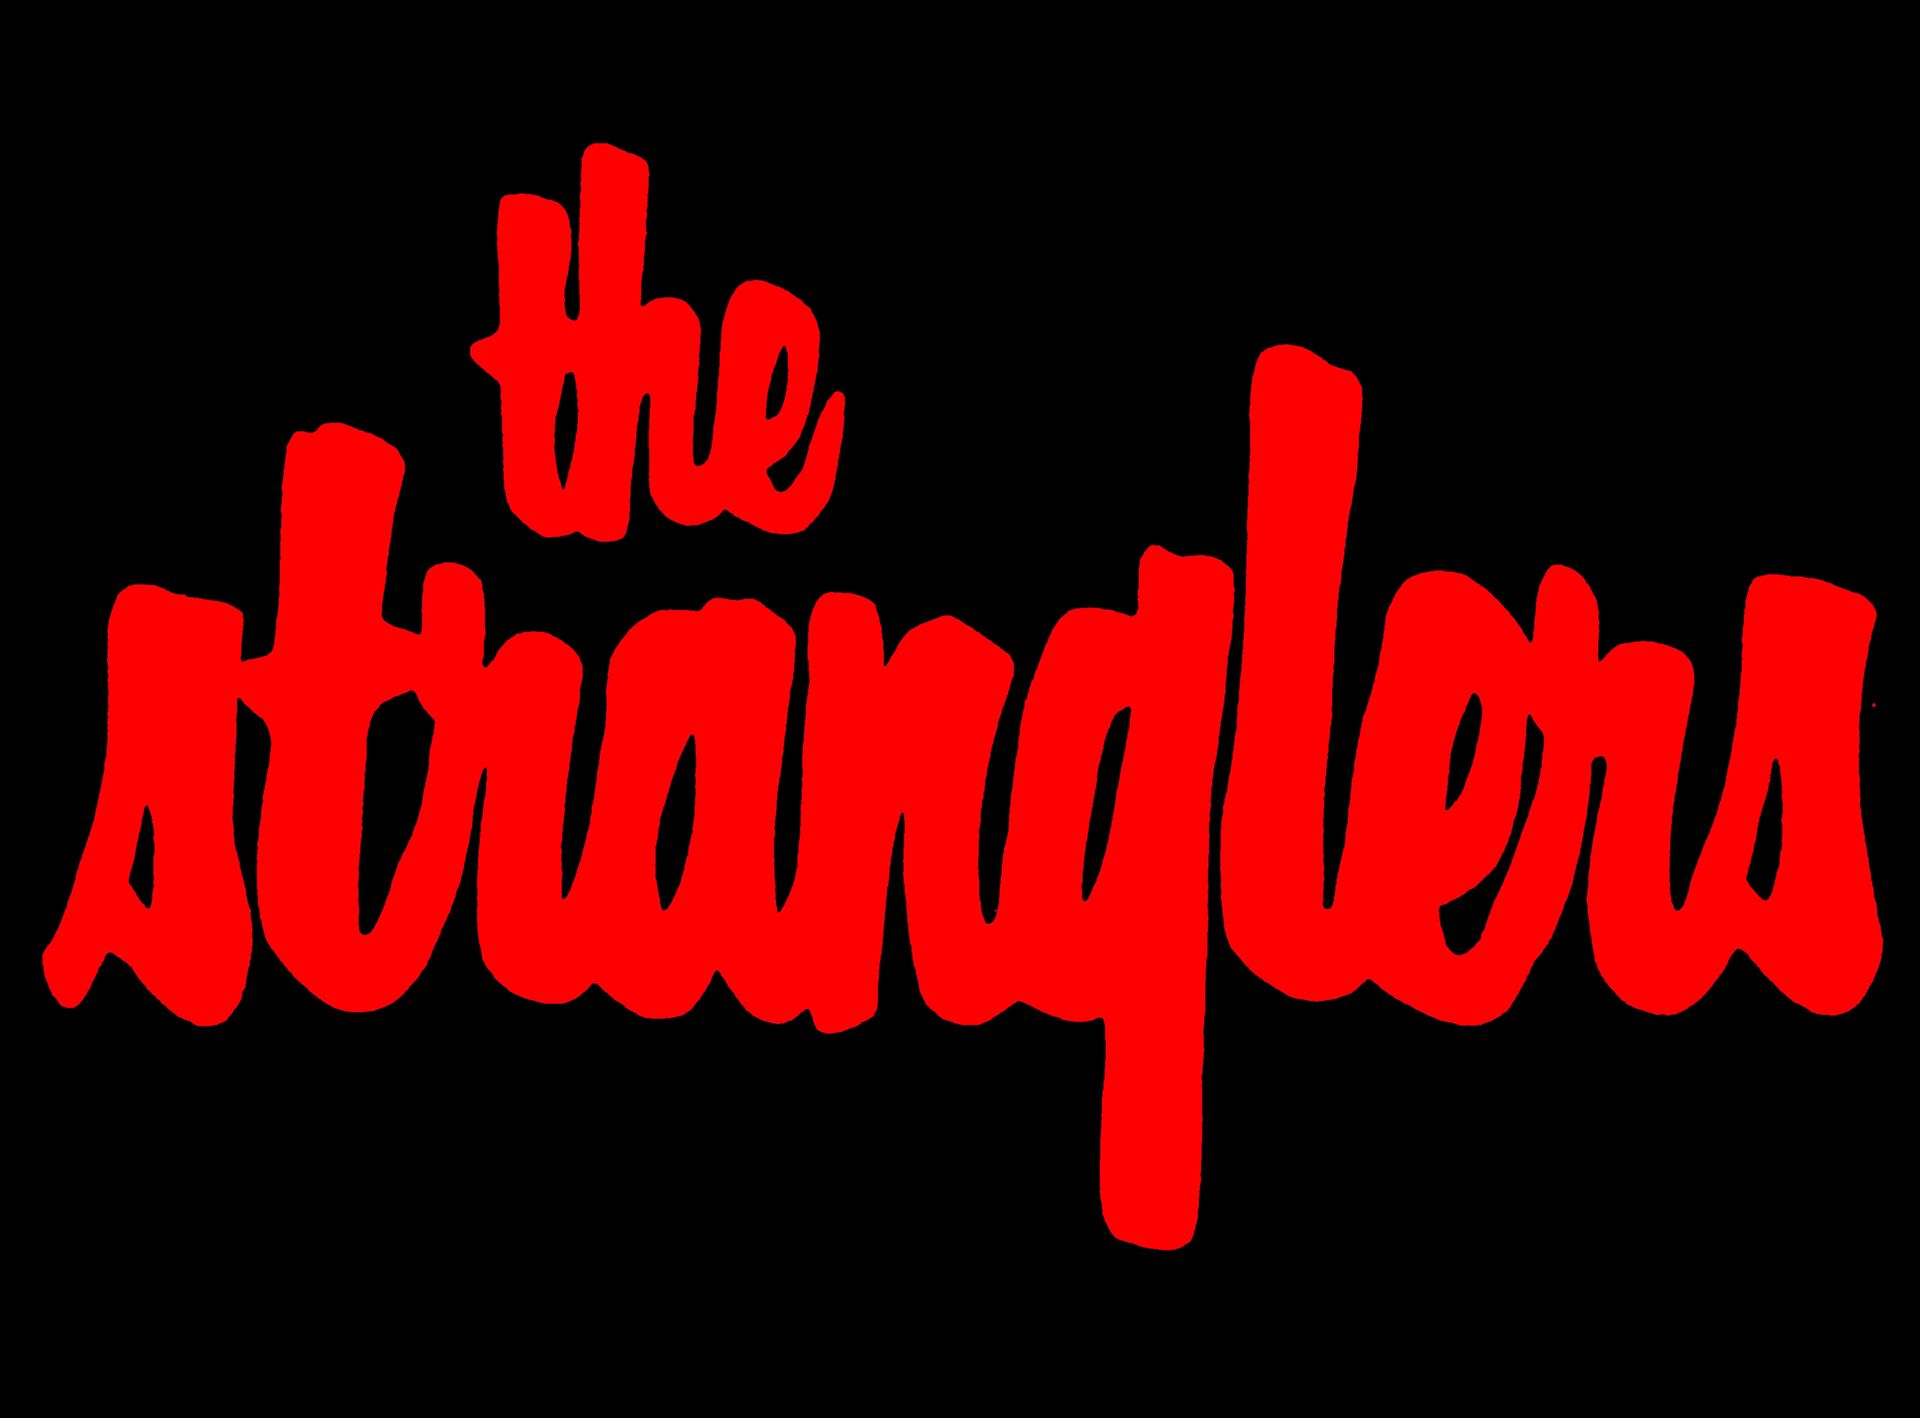 The Stranglers Live In Japan 2019 Verified Tickets. eplus most famous ticket provider